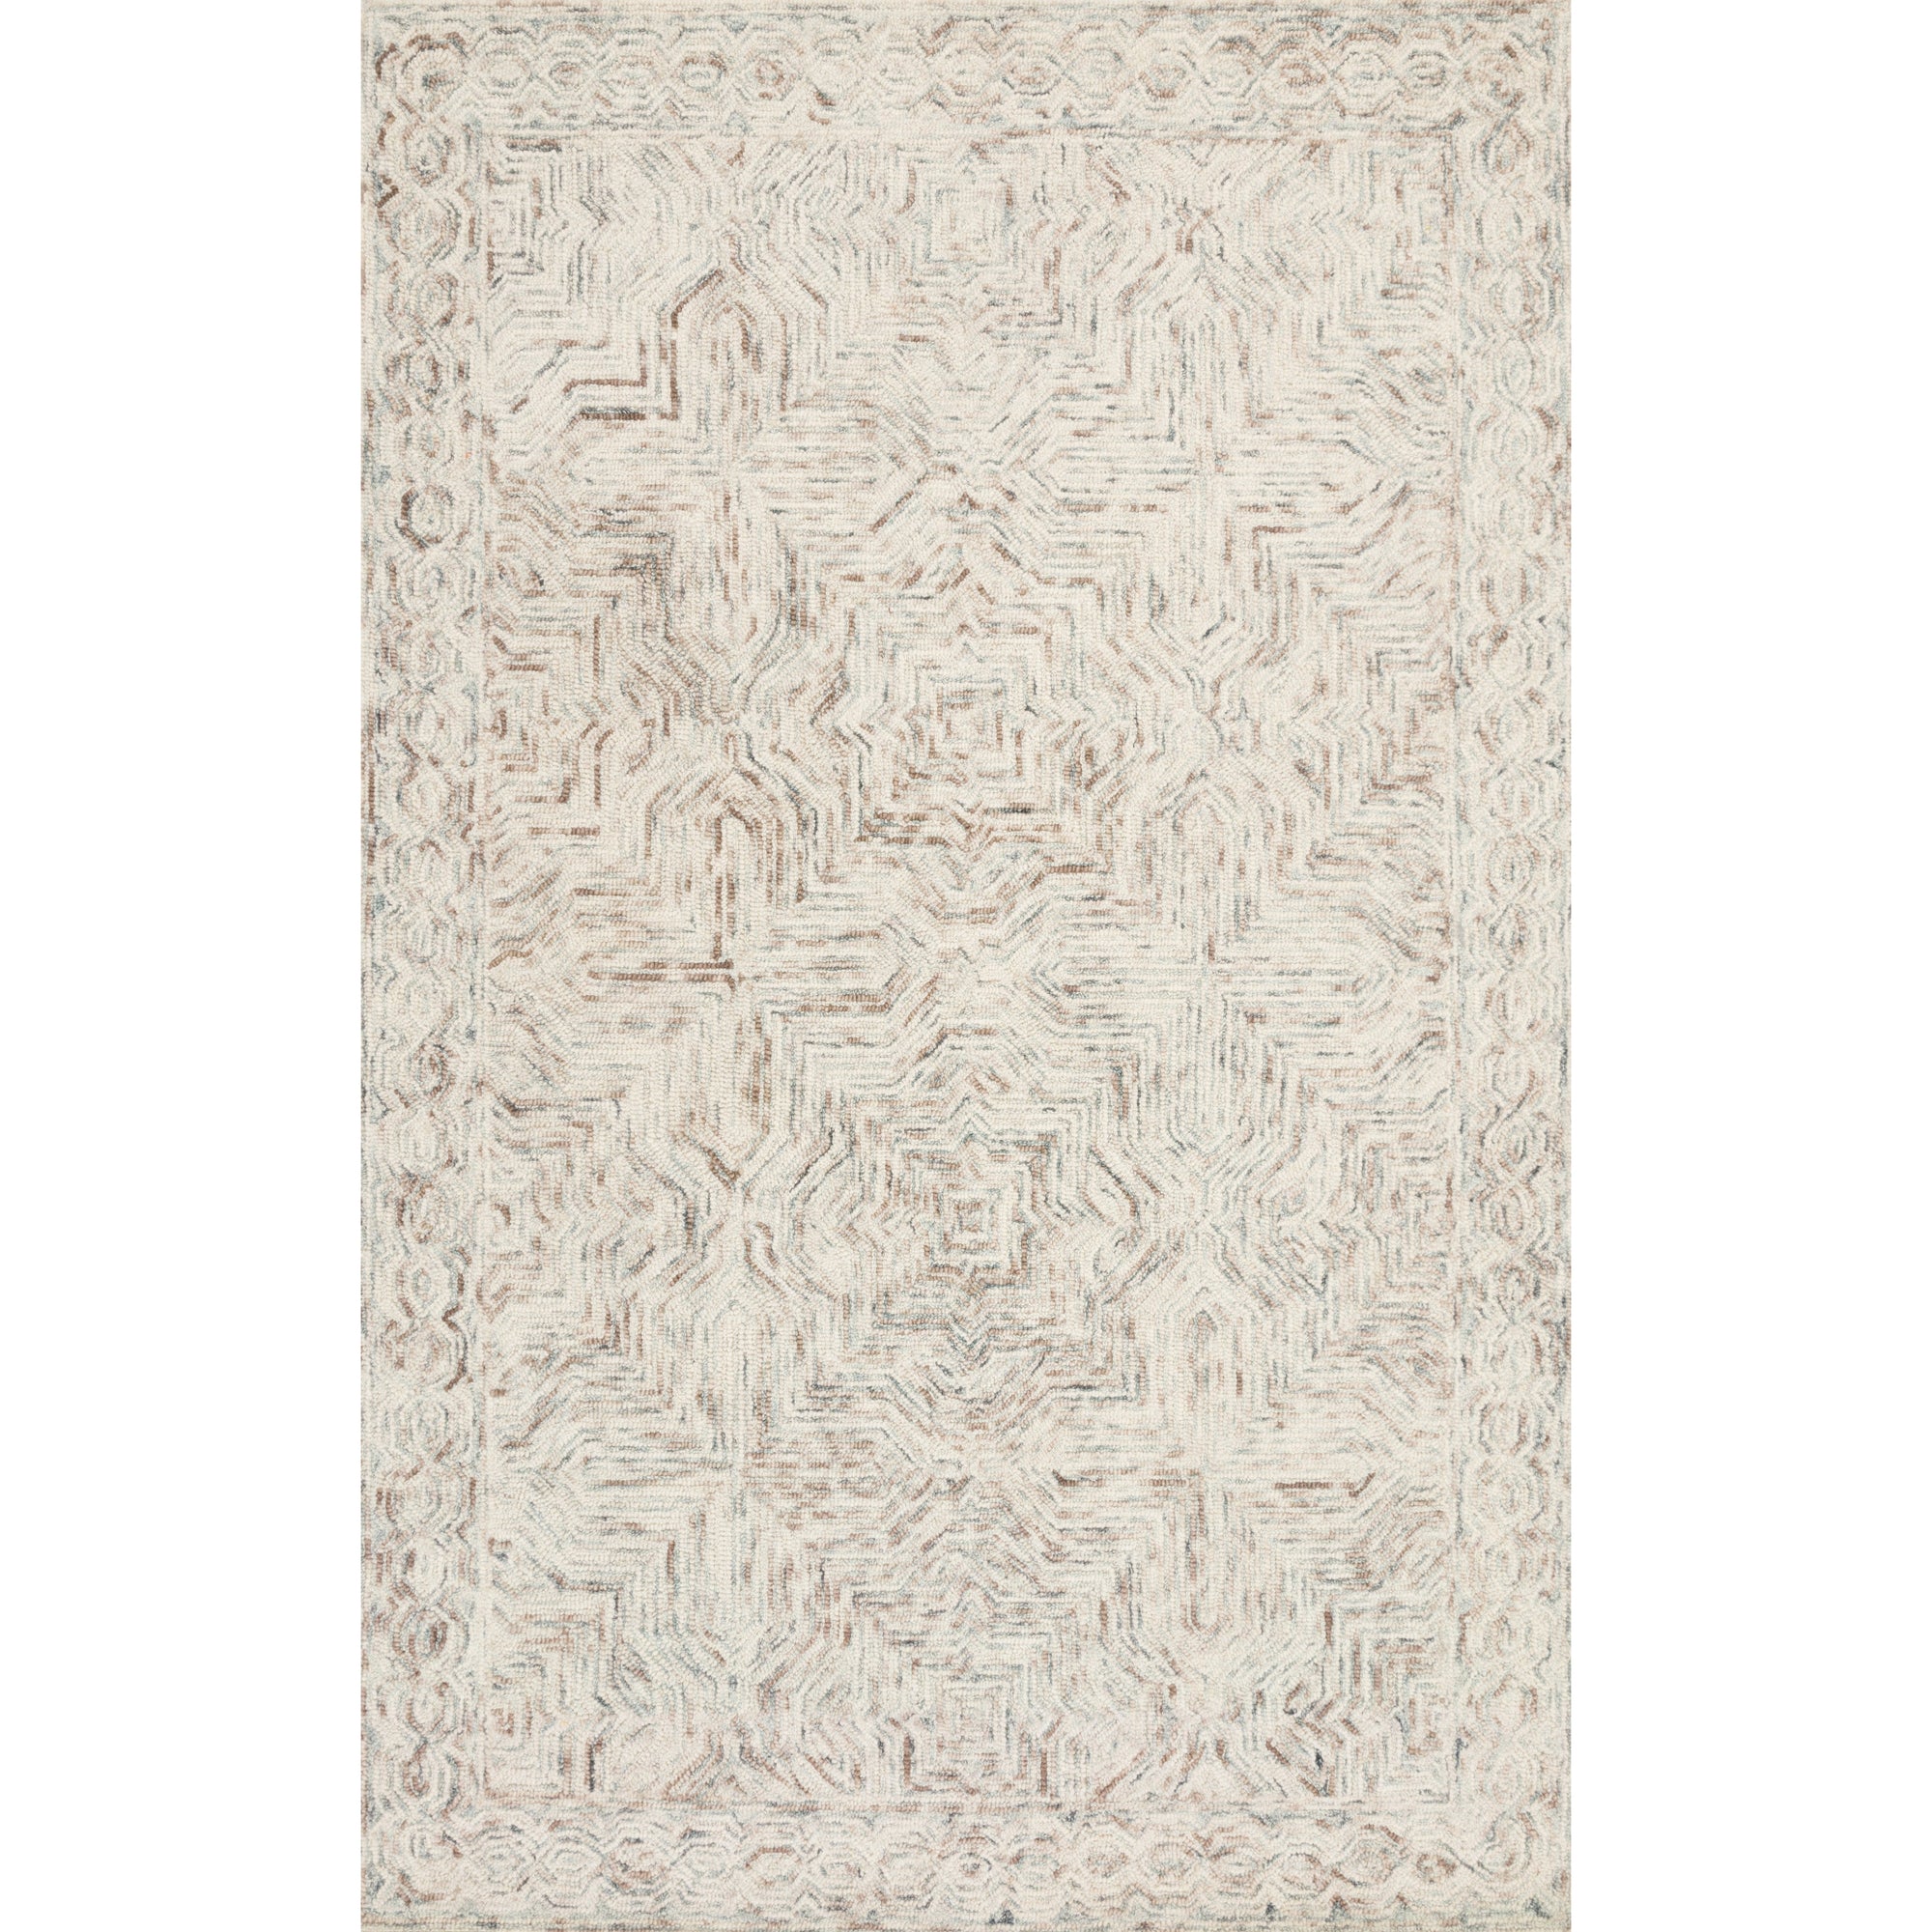 Rugs by Roo Loloi Ziva Neutral Area Rug in size 18" x 18" Sample